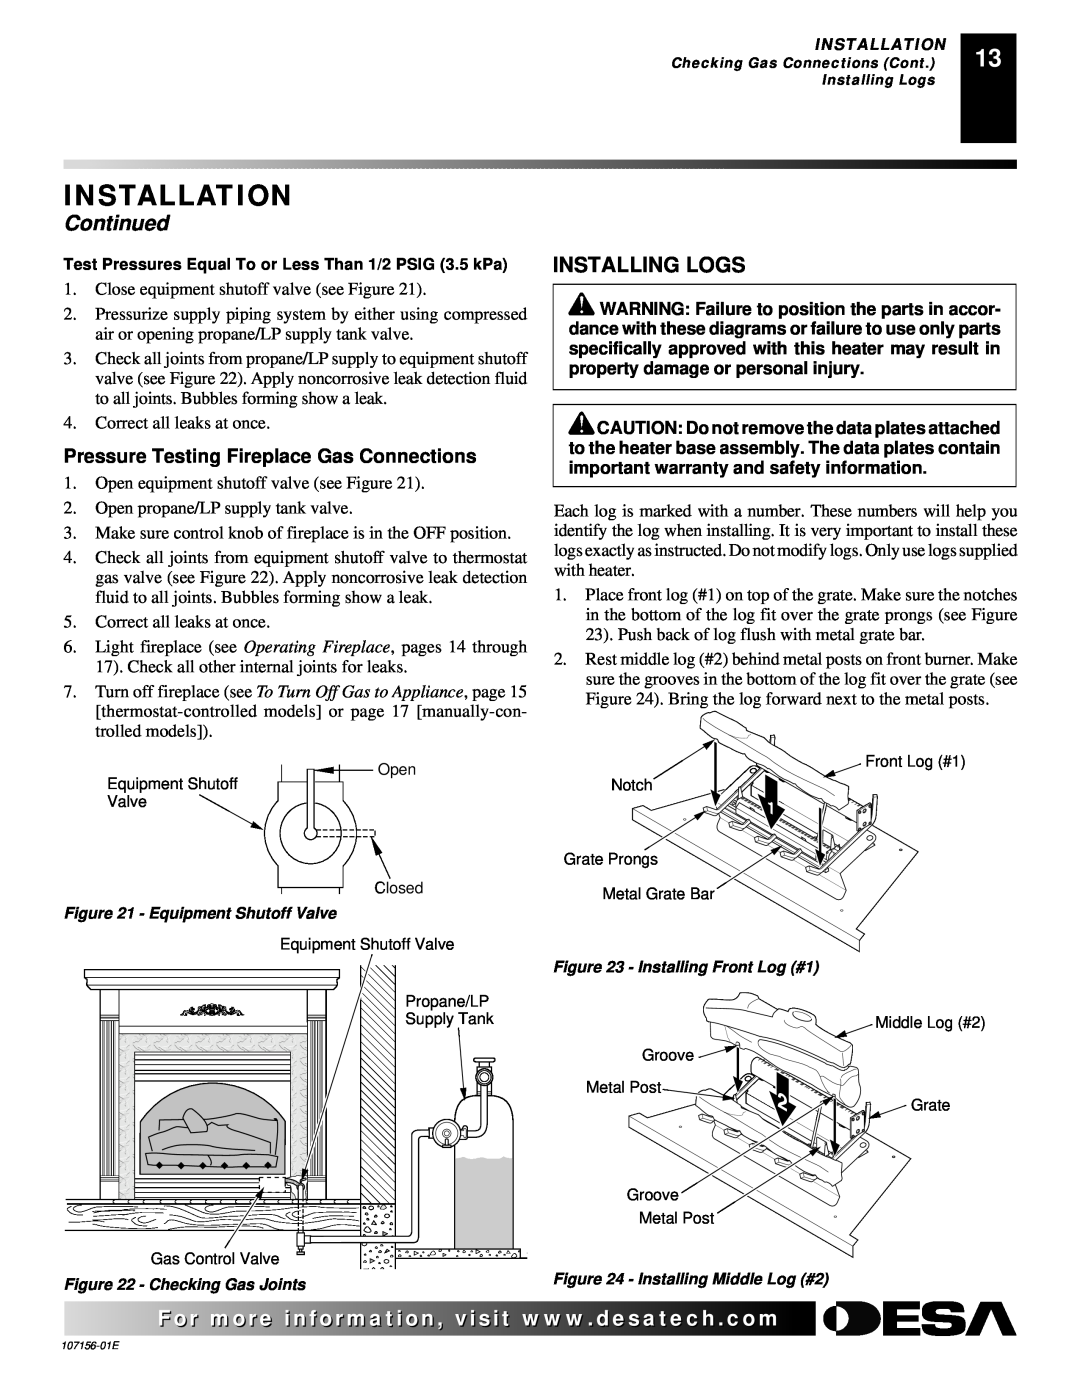 Vanguard Heating 107156-01E.pdf Installing Logs, Pressure Testing Fireplace Gas Connections, Installation, Continued 